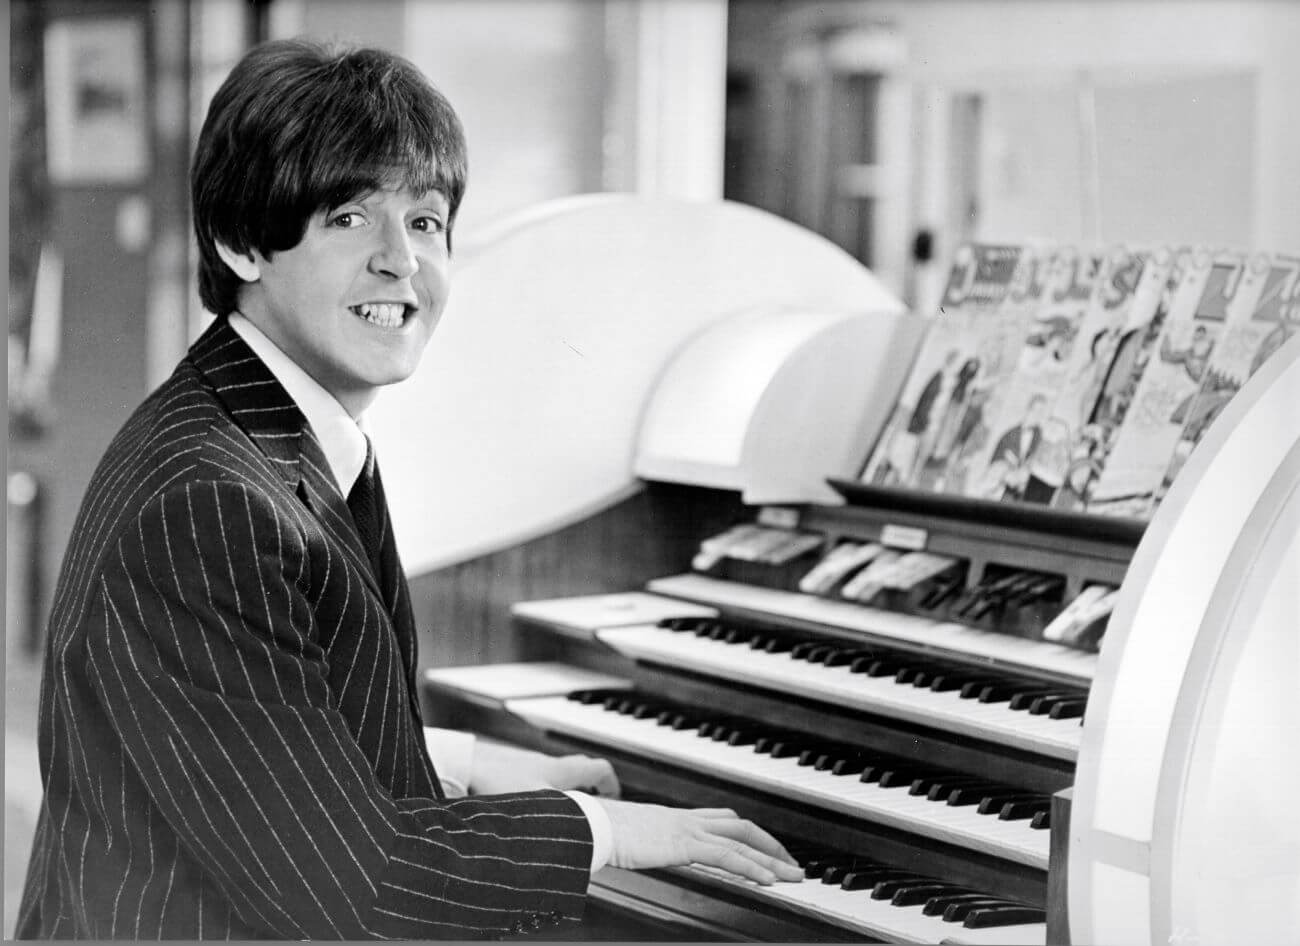 A black and white picture of The Beatles' Paul McCartney sitting at an organ.